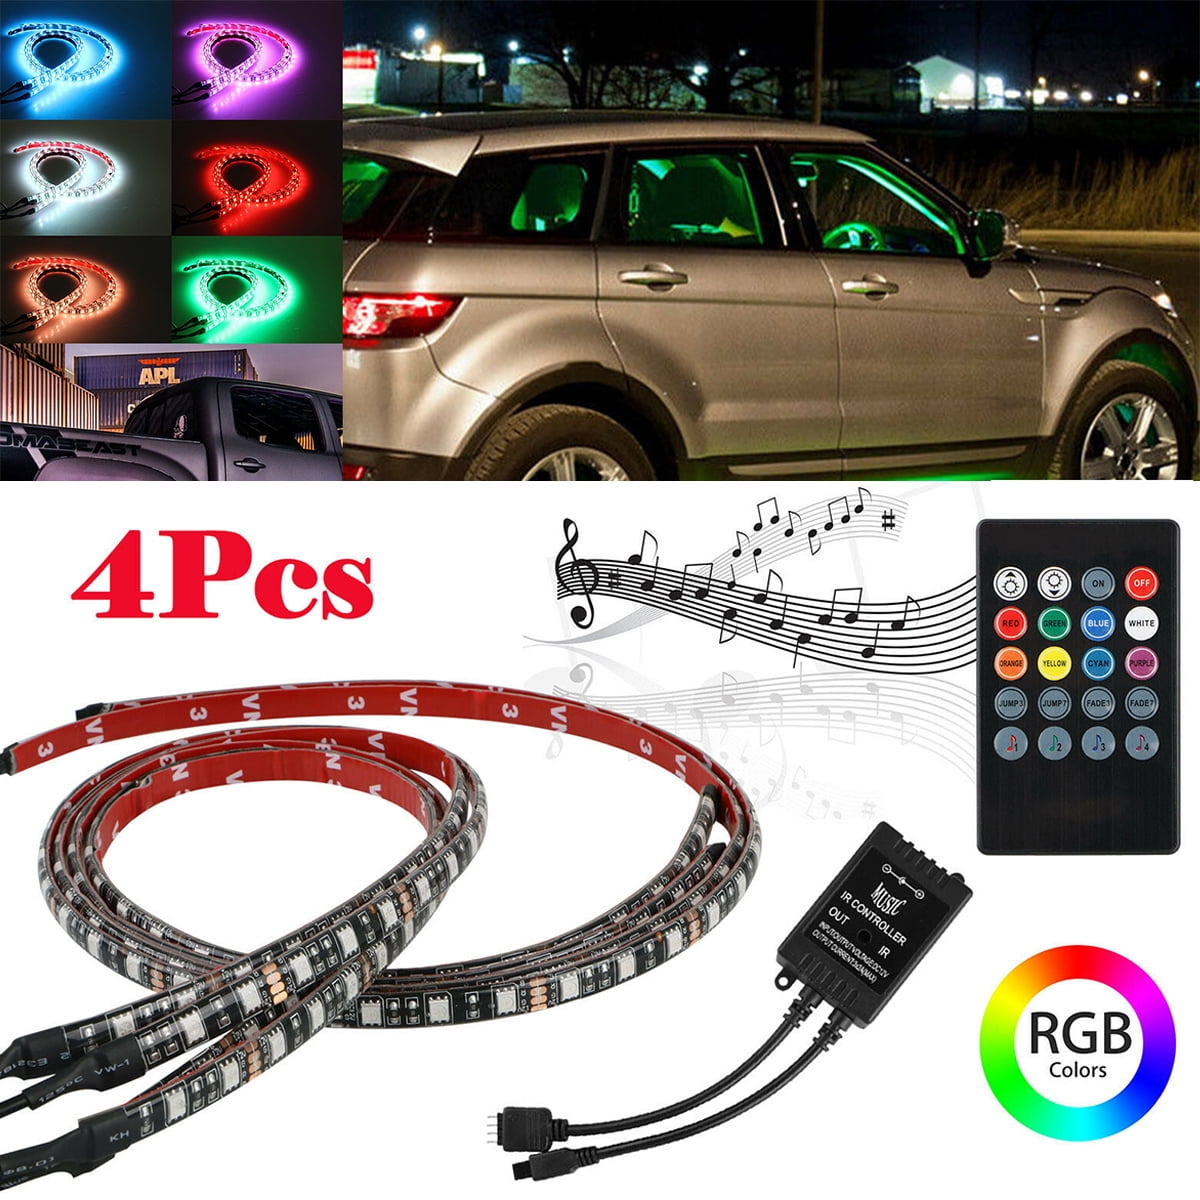 4Pcs 48 LEDs Multi-Color Car Interior Light FICBOX Car LED Strip Light Auto Atmosphere Lights Strip Waterproof Glow Neon Lighting Kit with Wireless Remote Control and Car Charger 